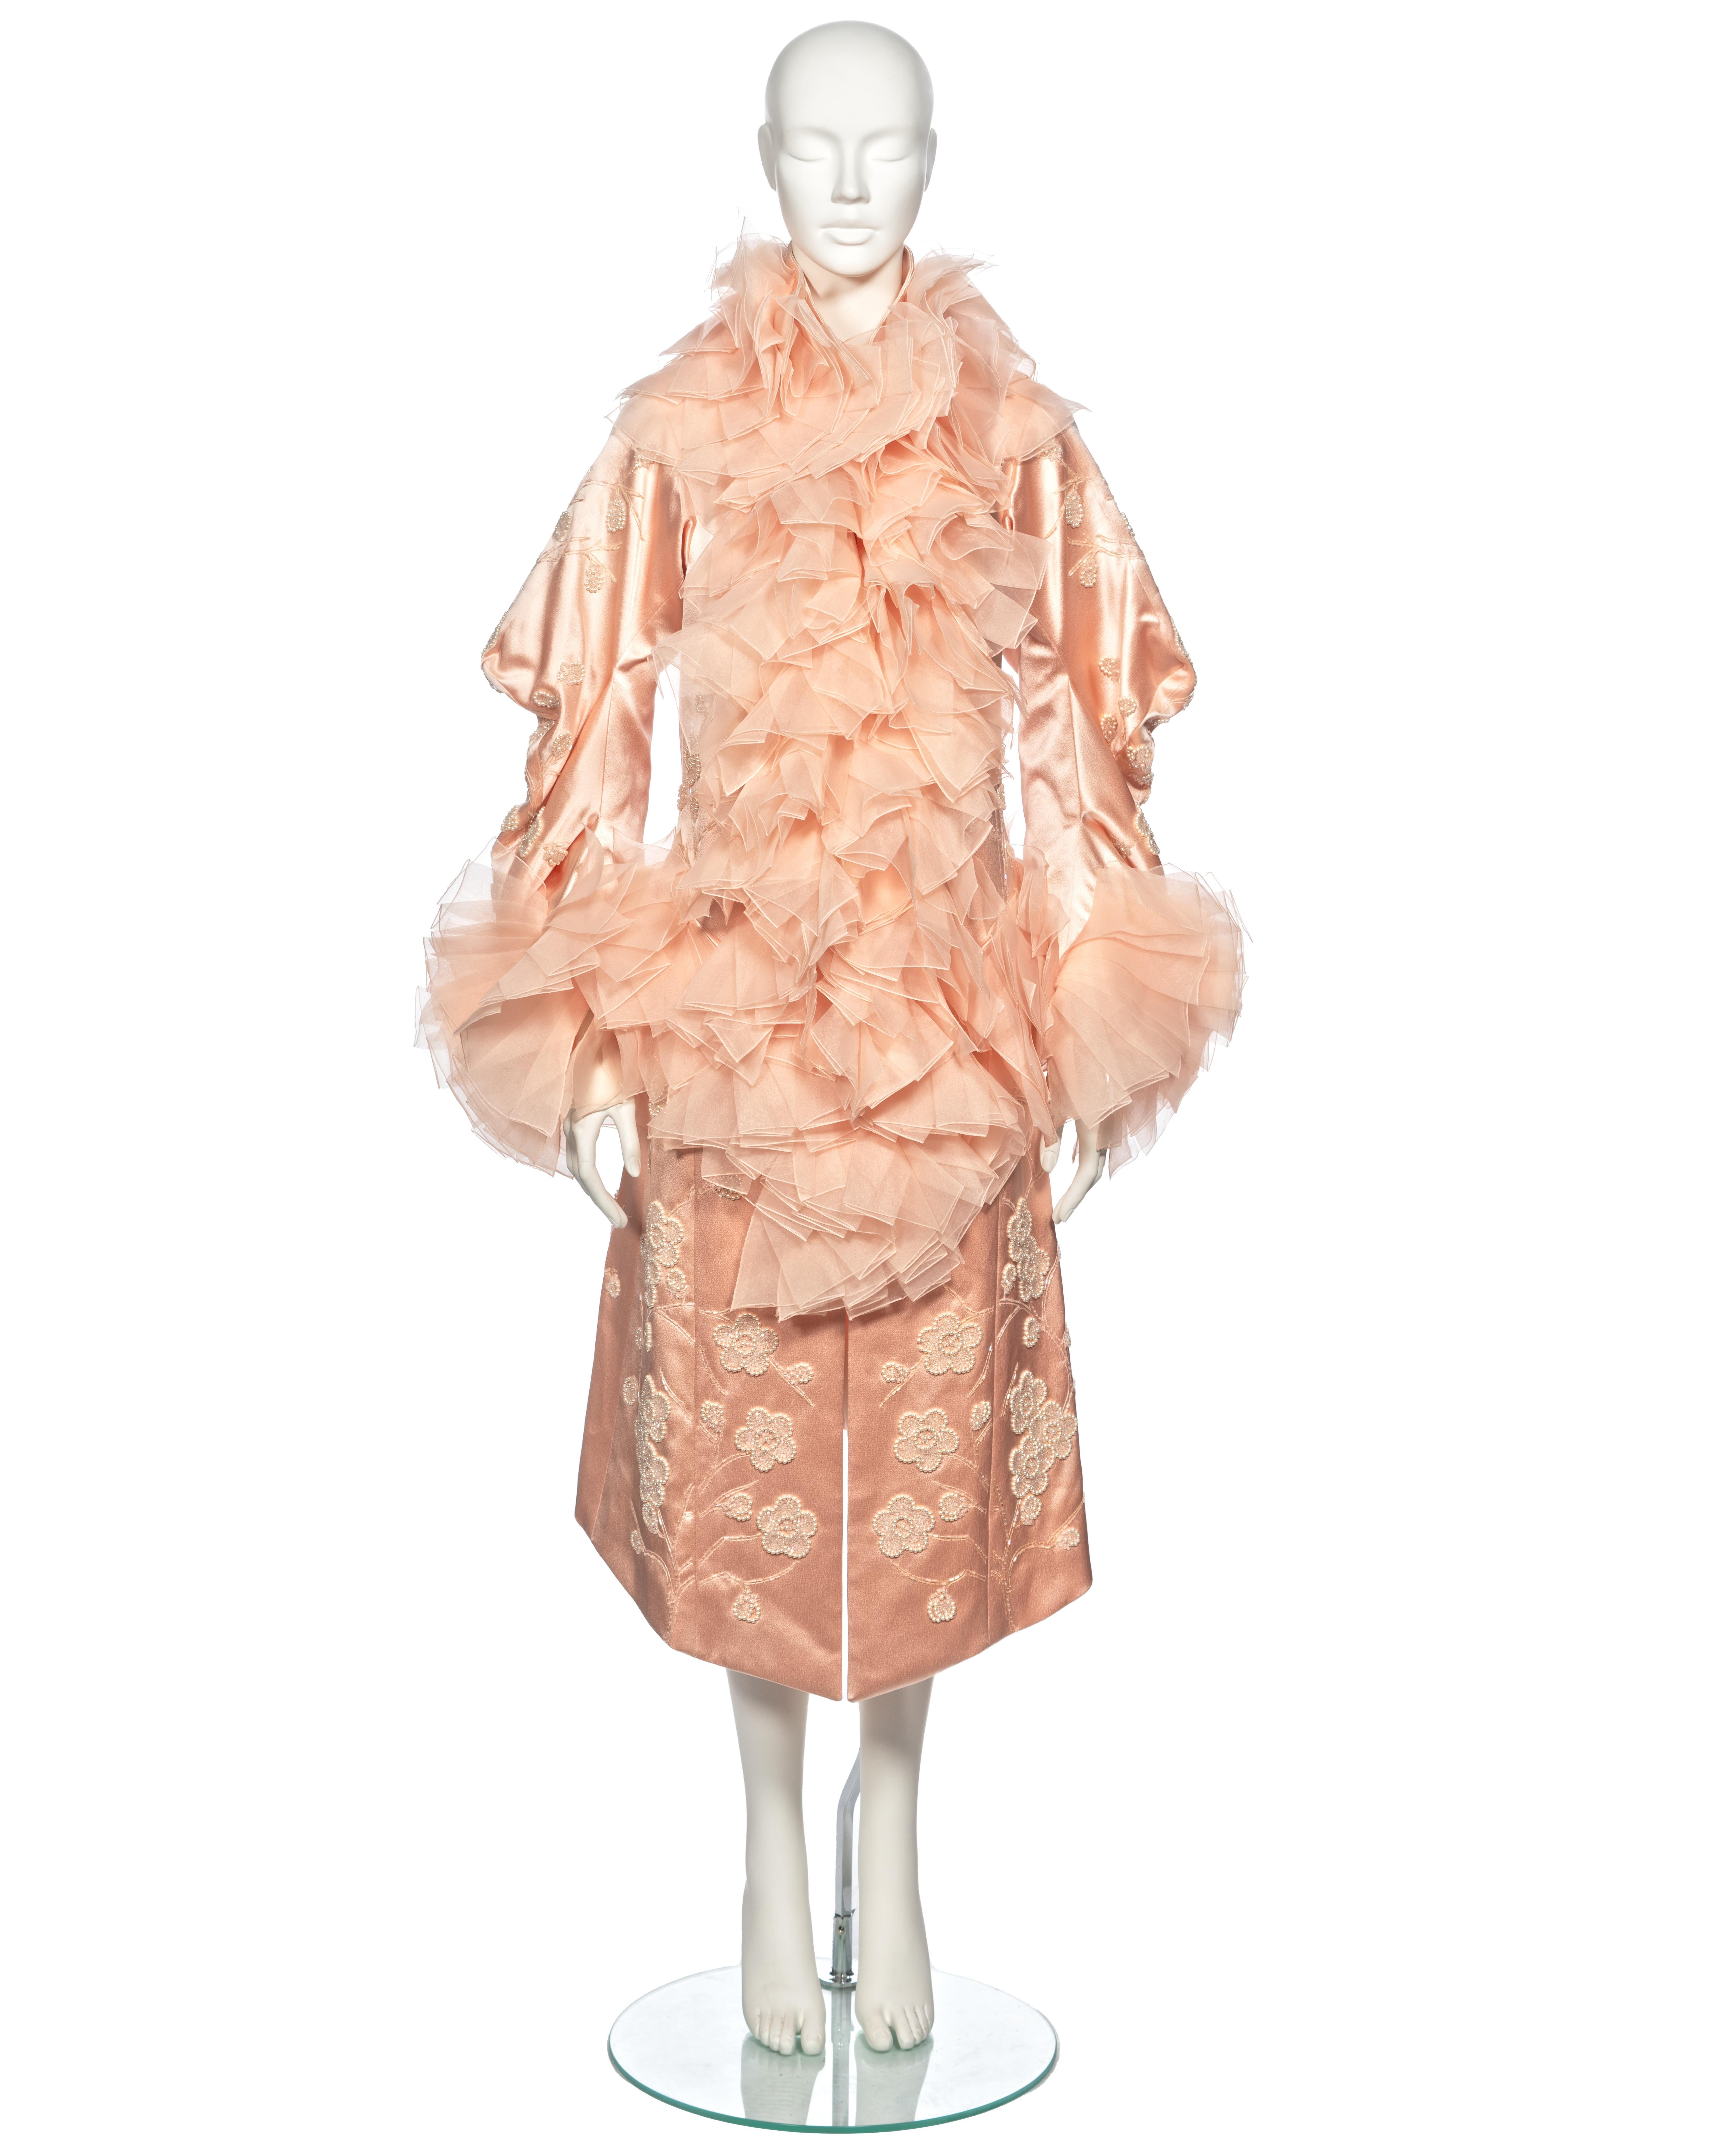 ▪ Archival Christian Dior Evening Coat
▪ Creative Director: John Galliano
▪ Hardcore Collection, Fall-Winter 2003
▪ Sold by One of a Kind Archive
▪ Museum Grade
▪ Crafted from exquisite blush pink silk
▪ Delicately embroidered florals embellished